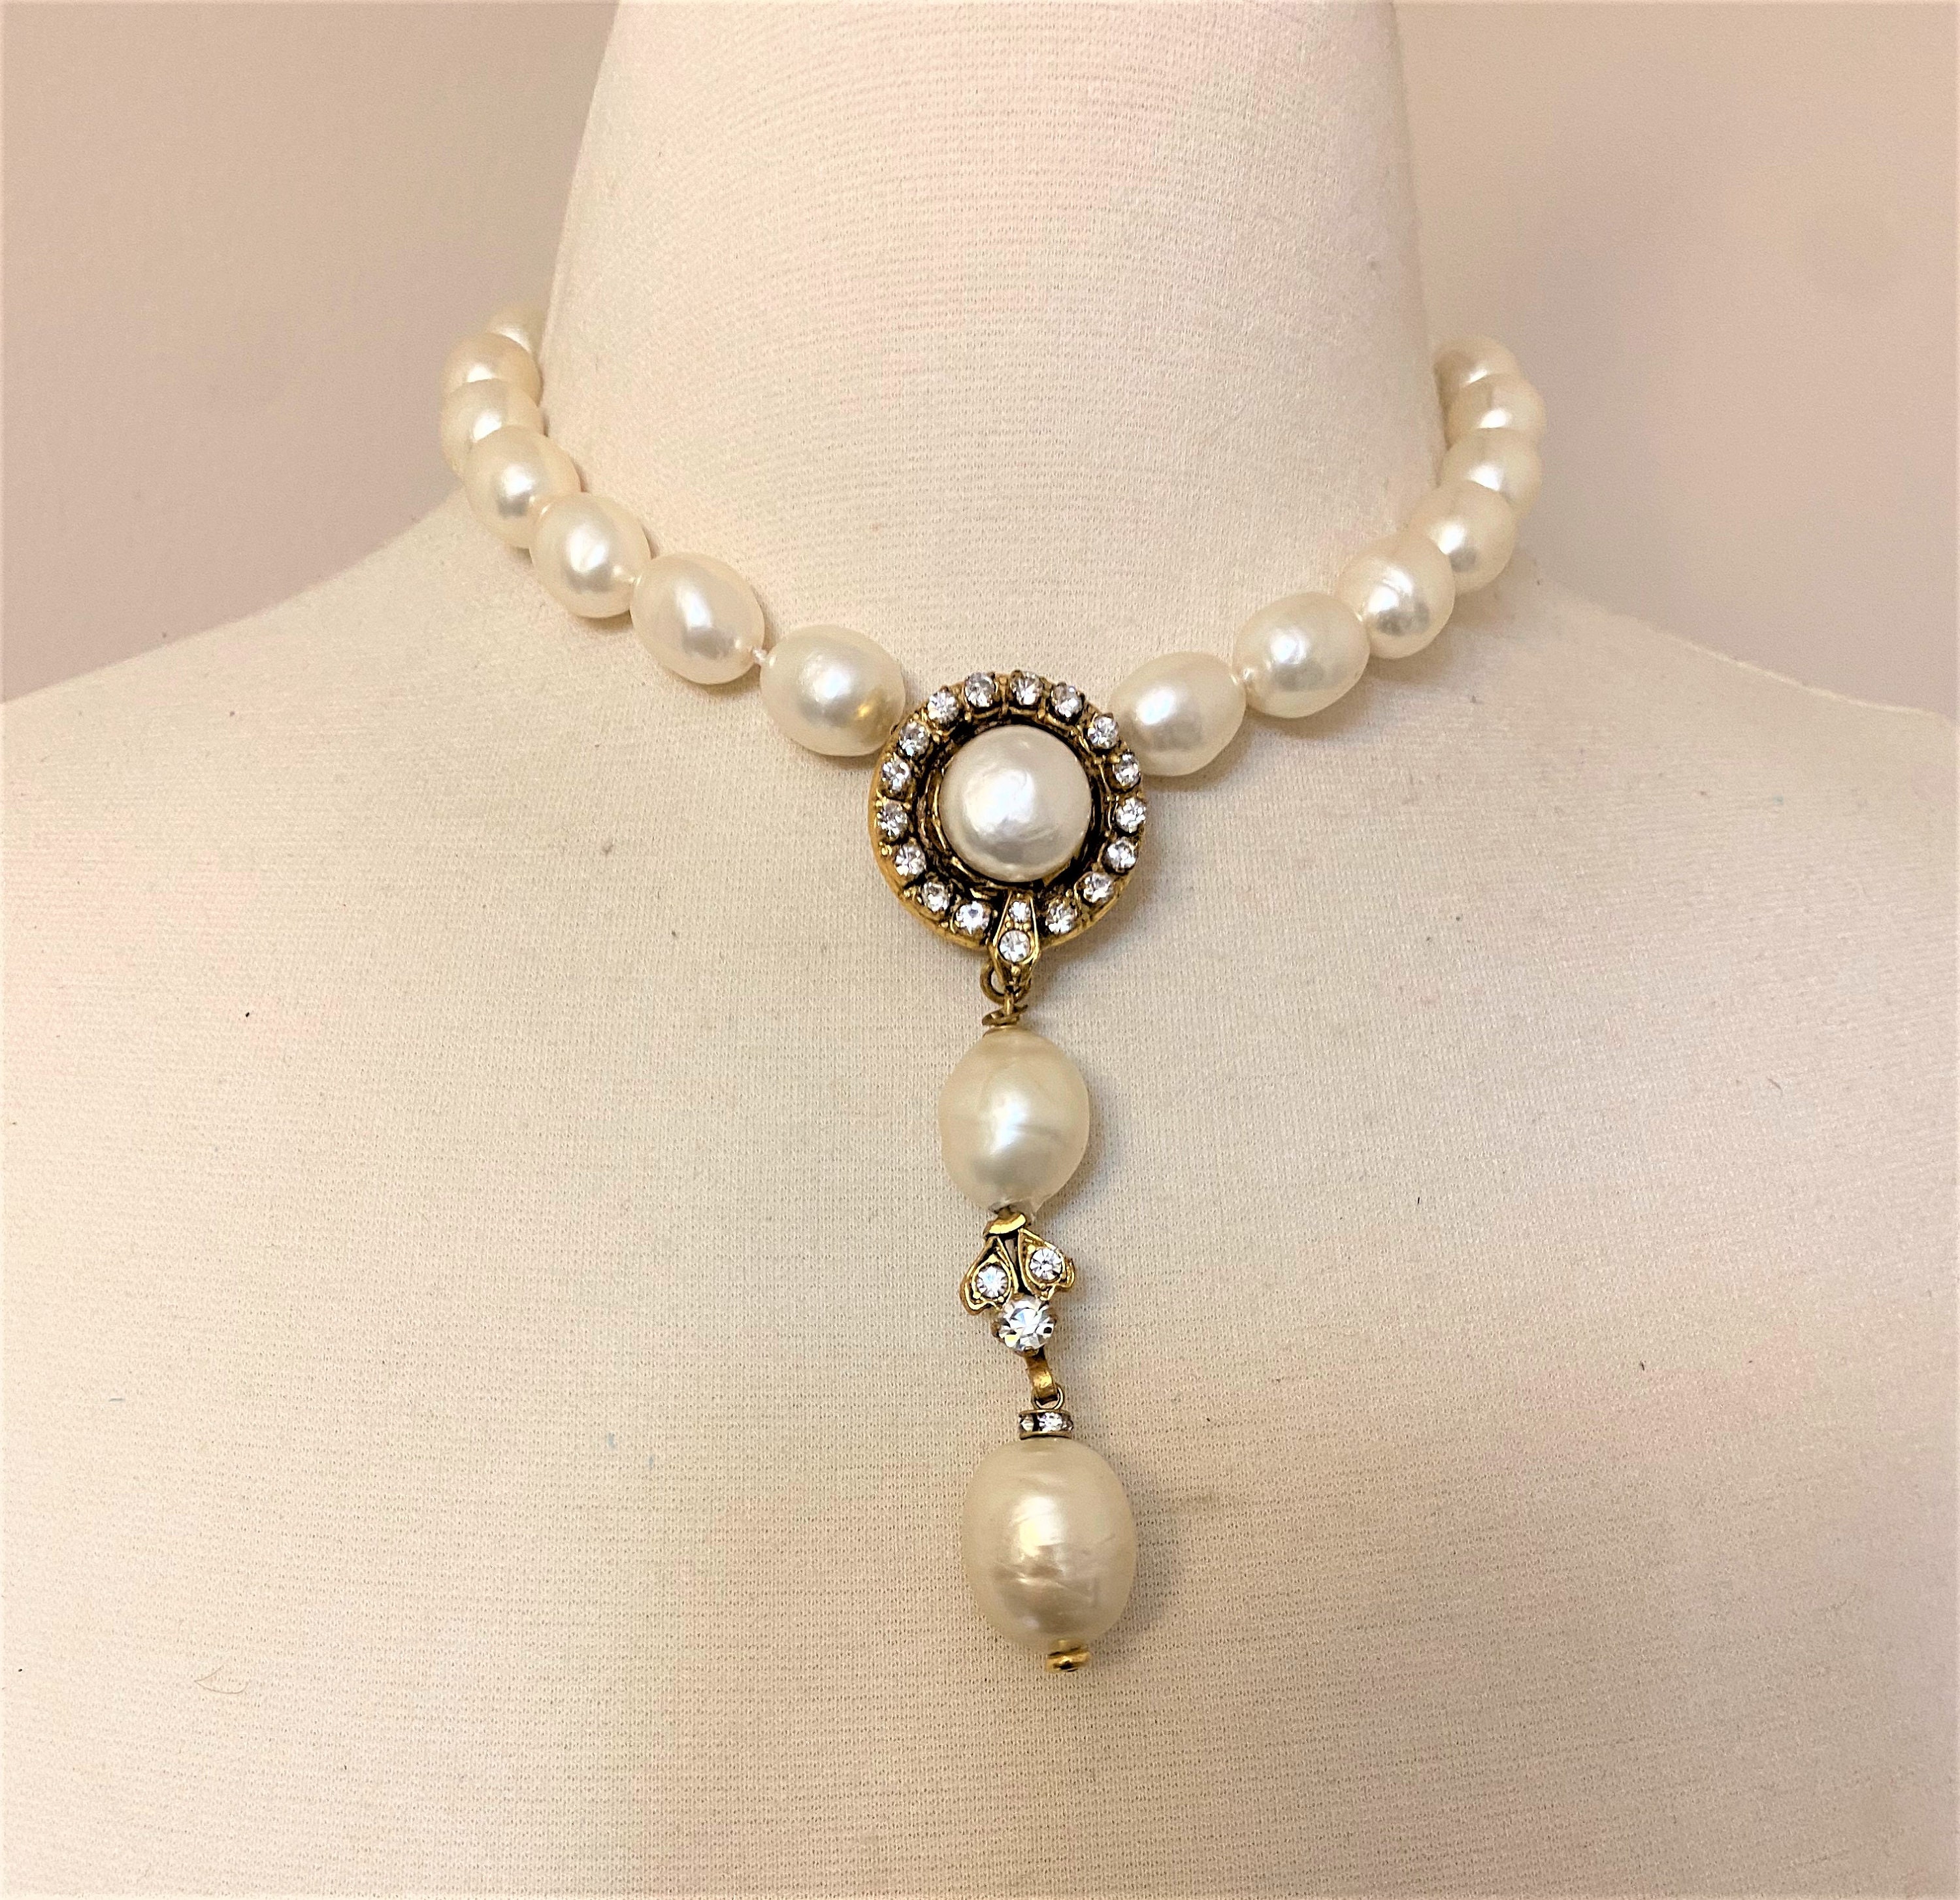 Chanel 36 Faux Pearl Necklace